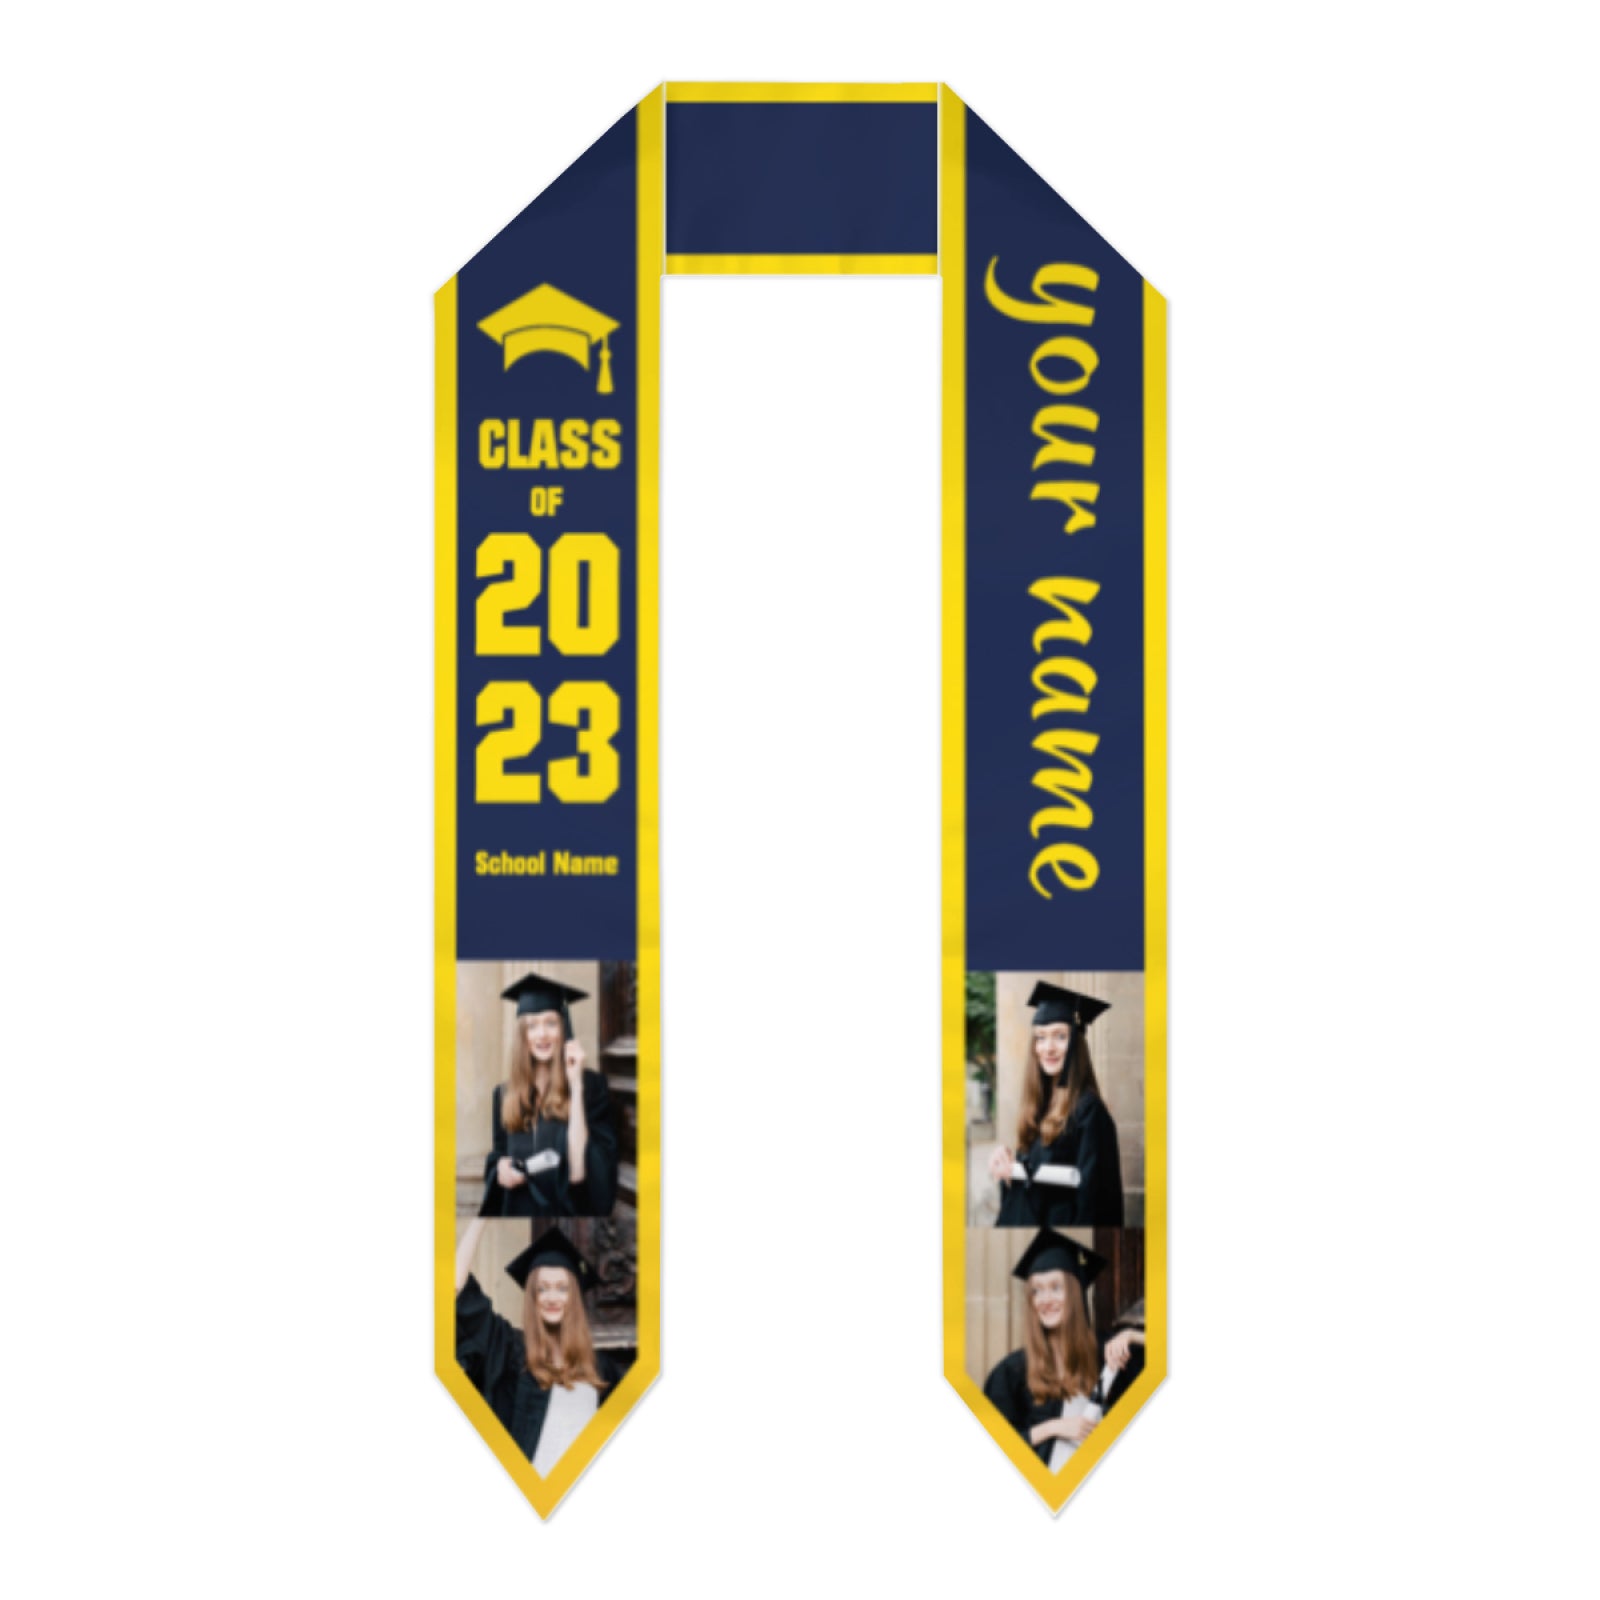 Class Of 2023 Best Gift For Graduation's Day - Upload Image - Personalized Graduation Stole - colorfulcustom